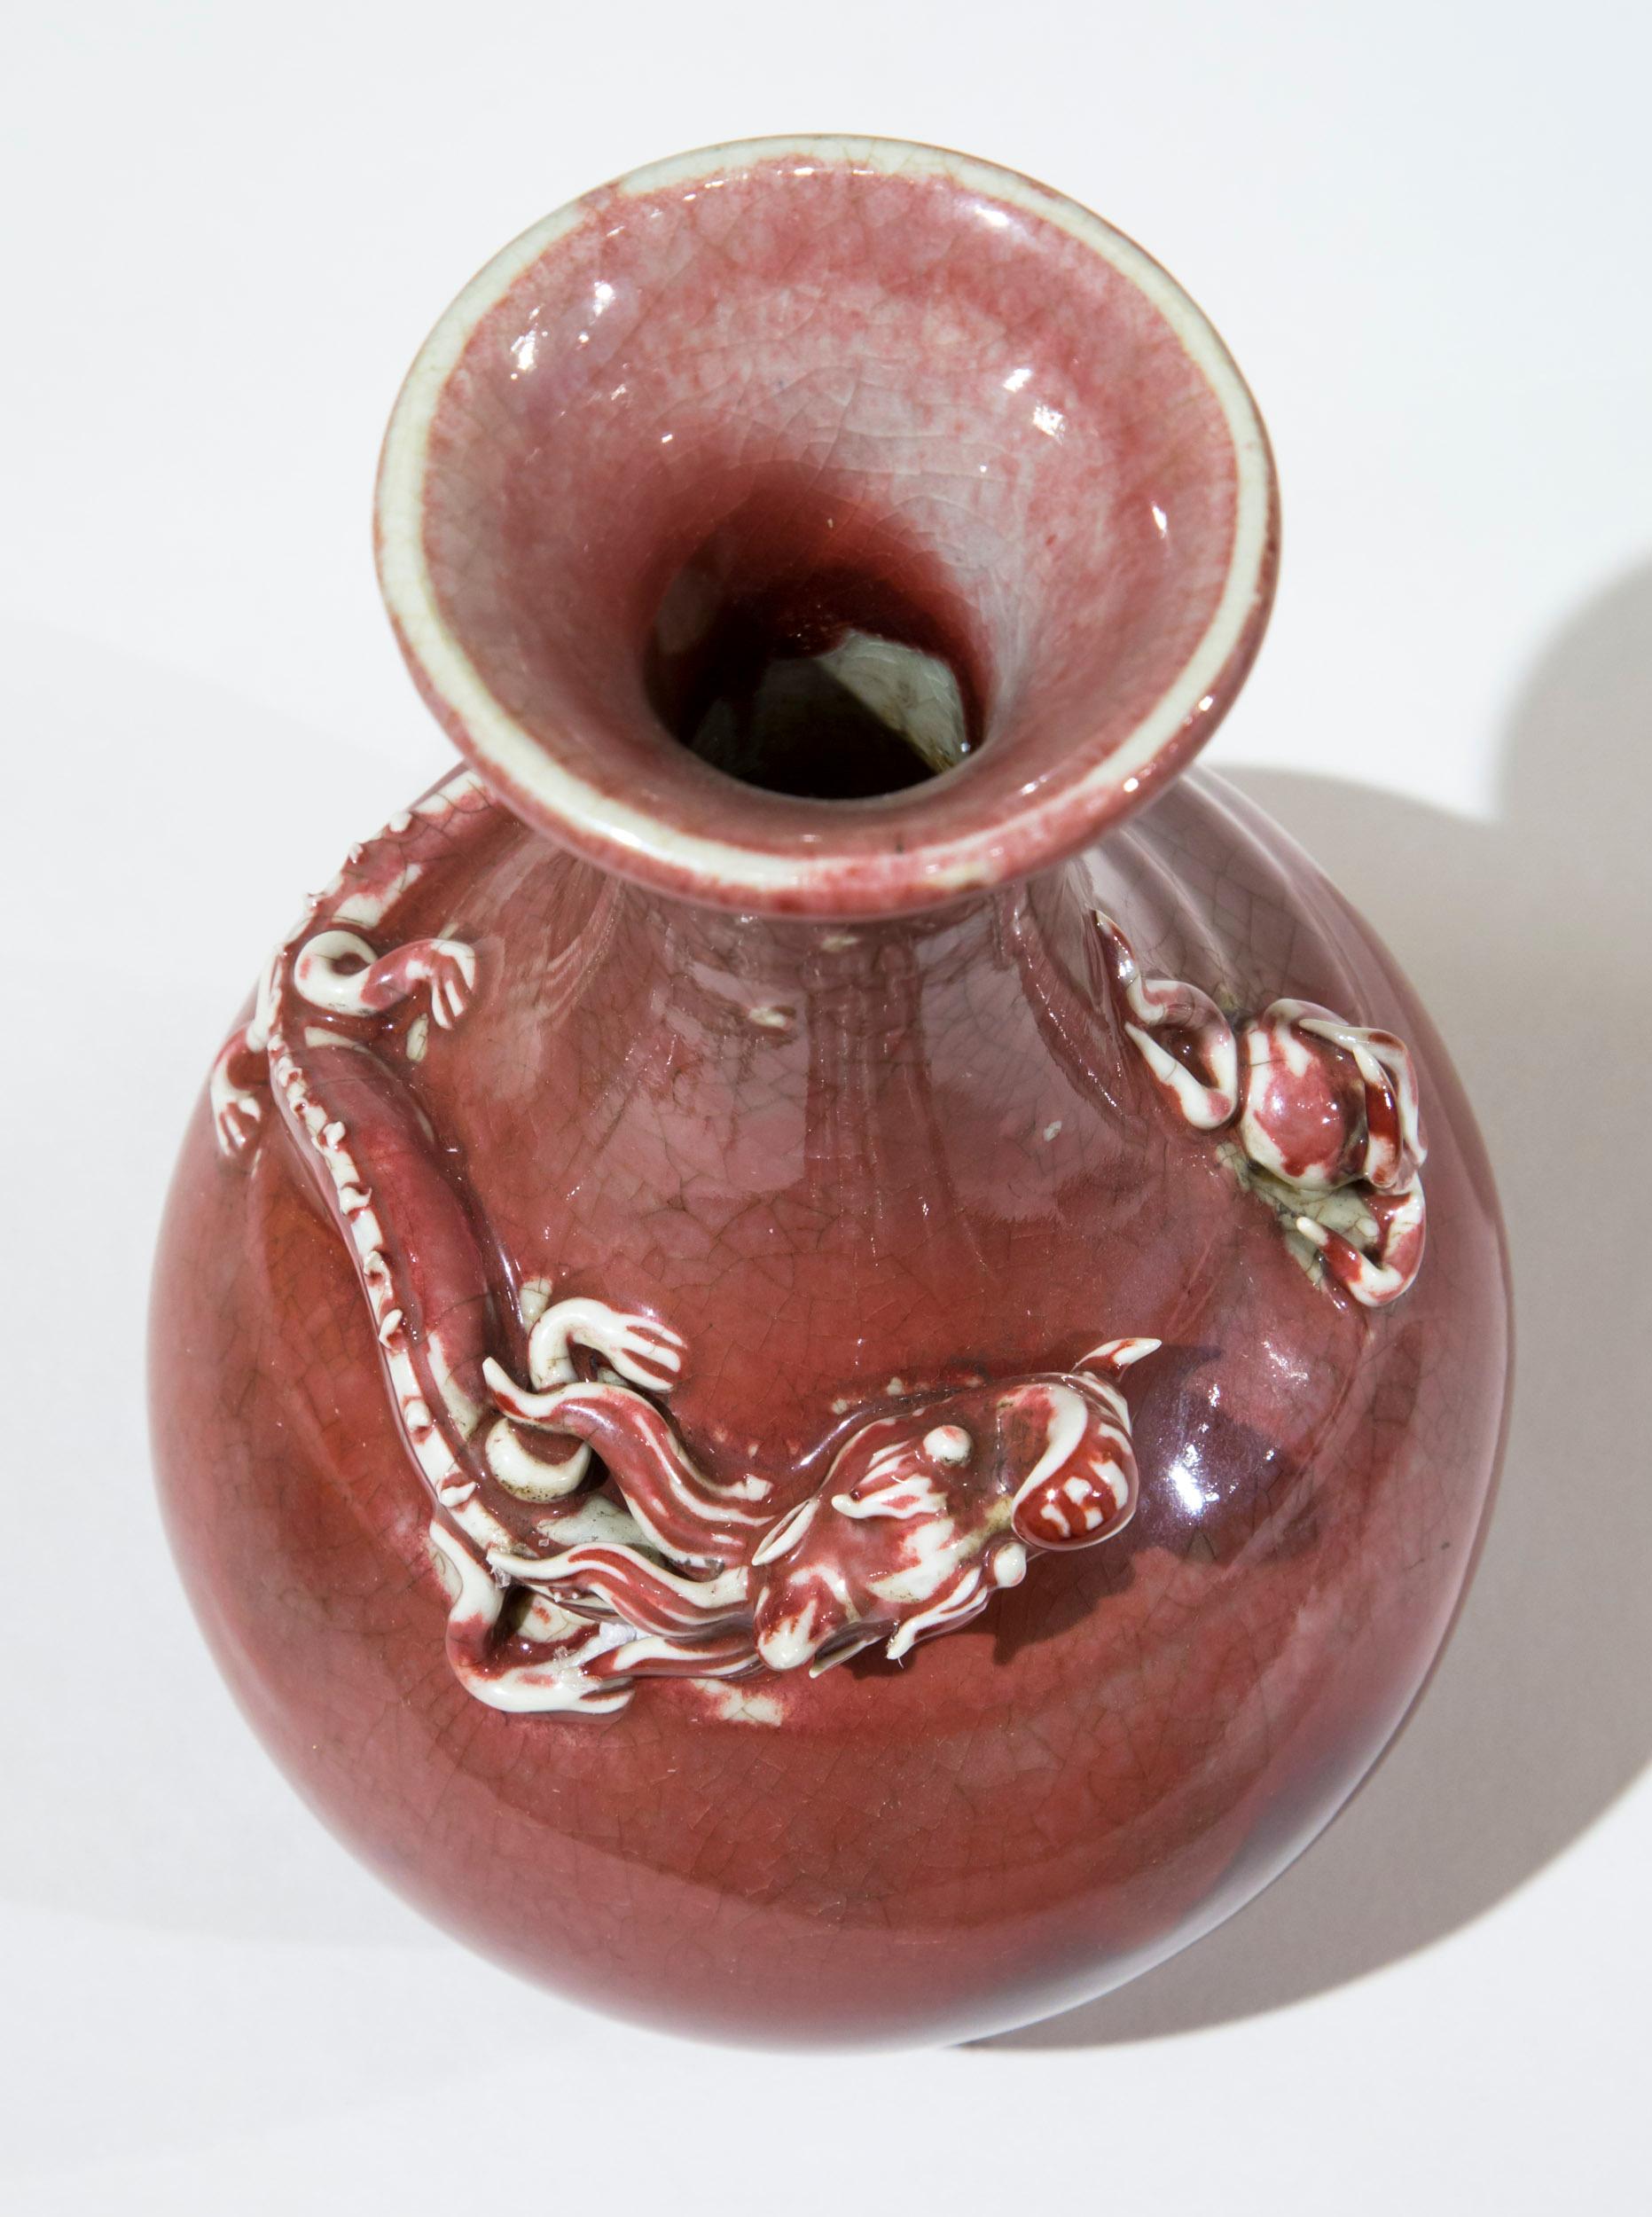 A highly decorative vase, peach bloom crackle glazed, with applied dragon.

China, 20th century.

Measurements
Height 23 cm / 9 in.
  